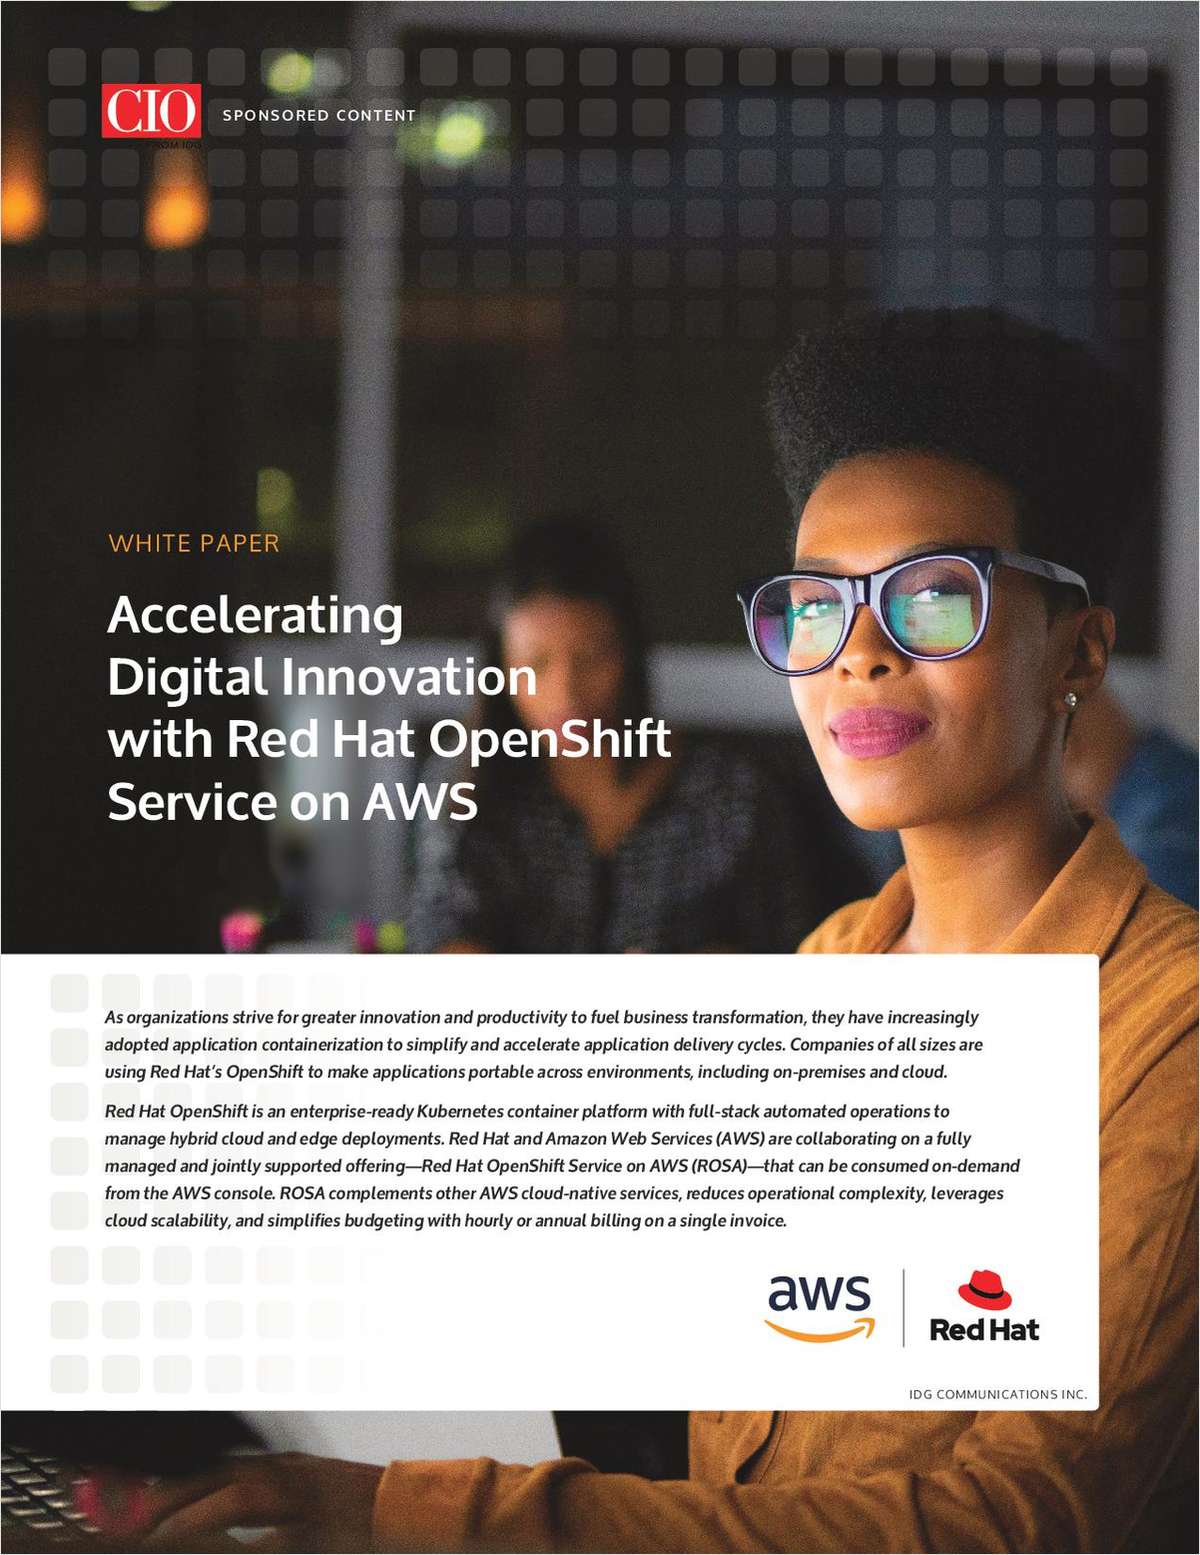 Optimizing Digital Innovation with Red Hat OpenShift on AWS (ROSA)